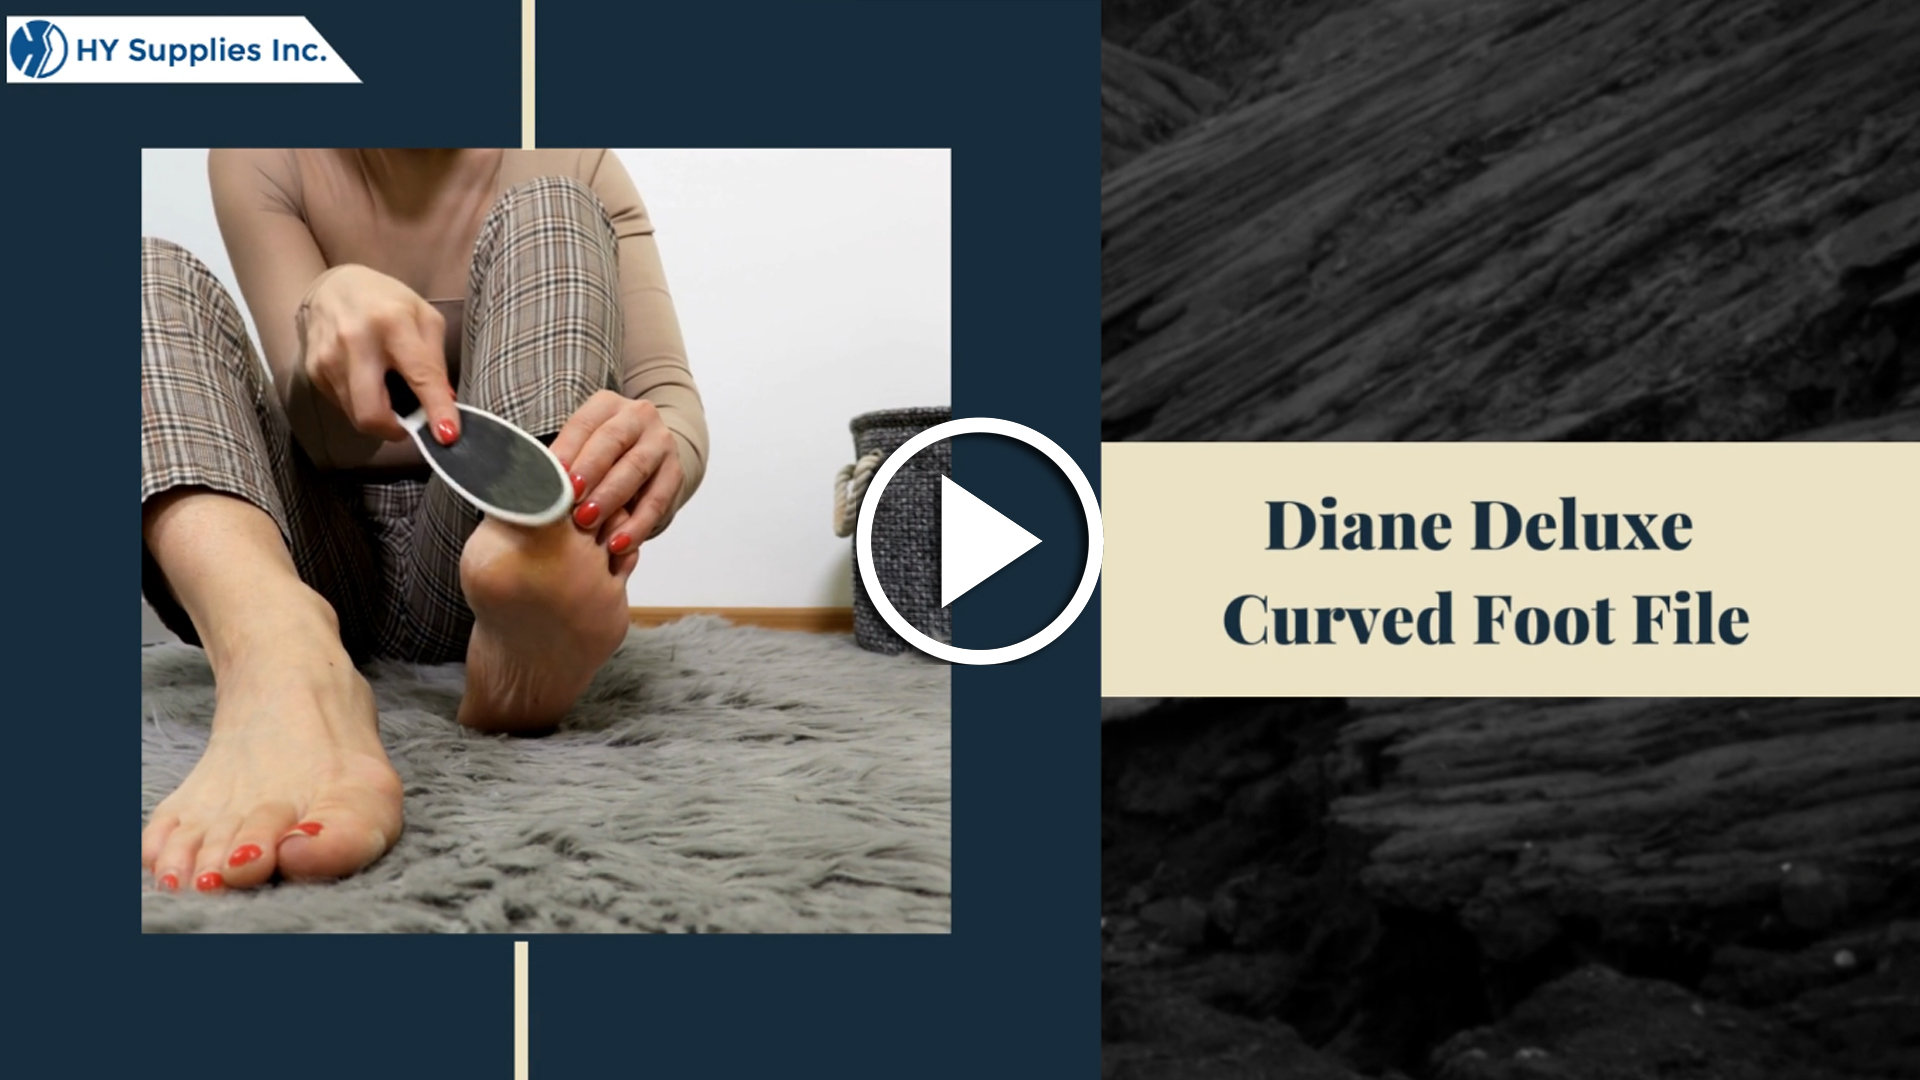 Diane Deluxe Curved Foot File